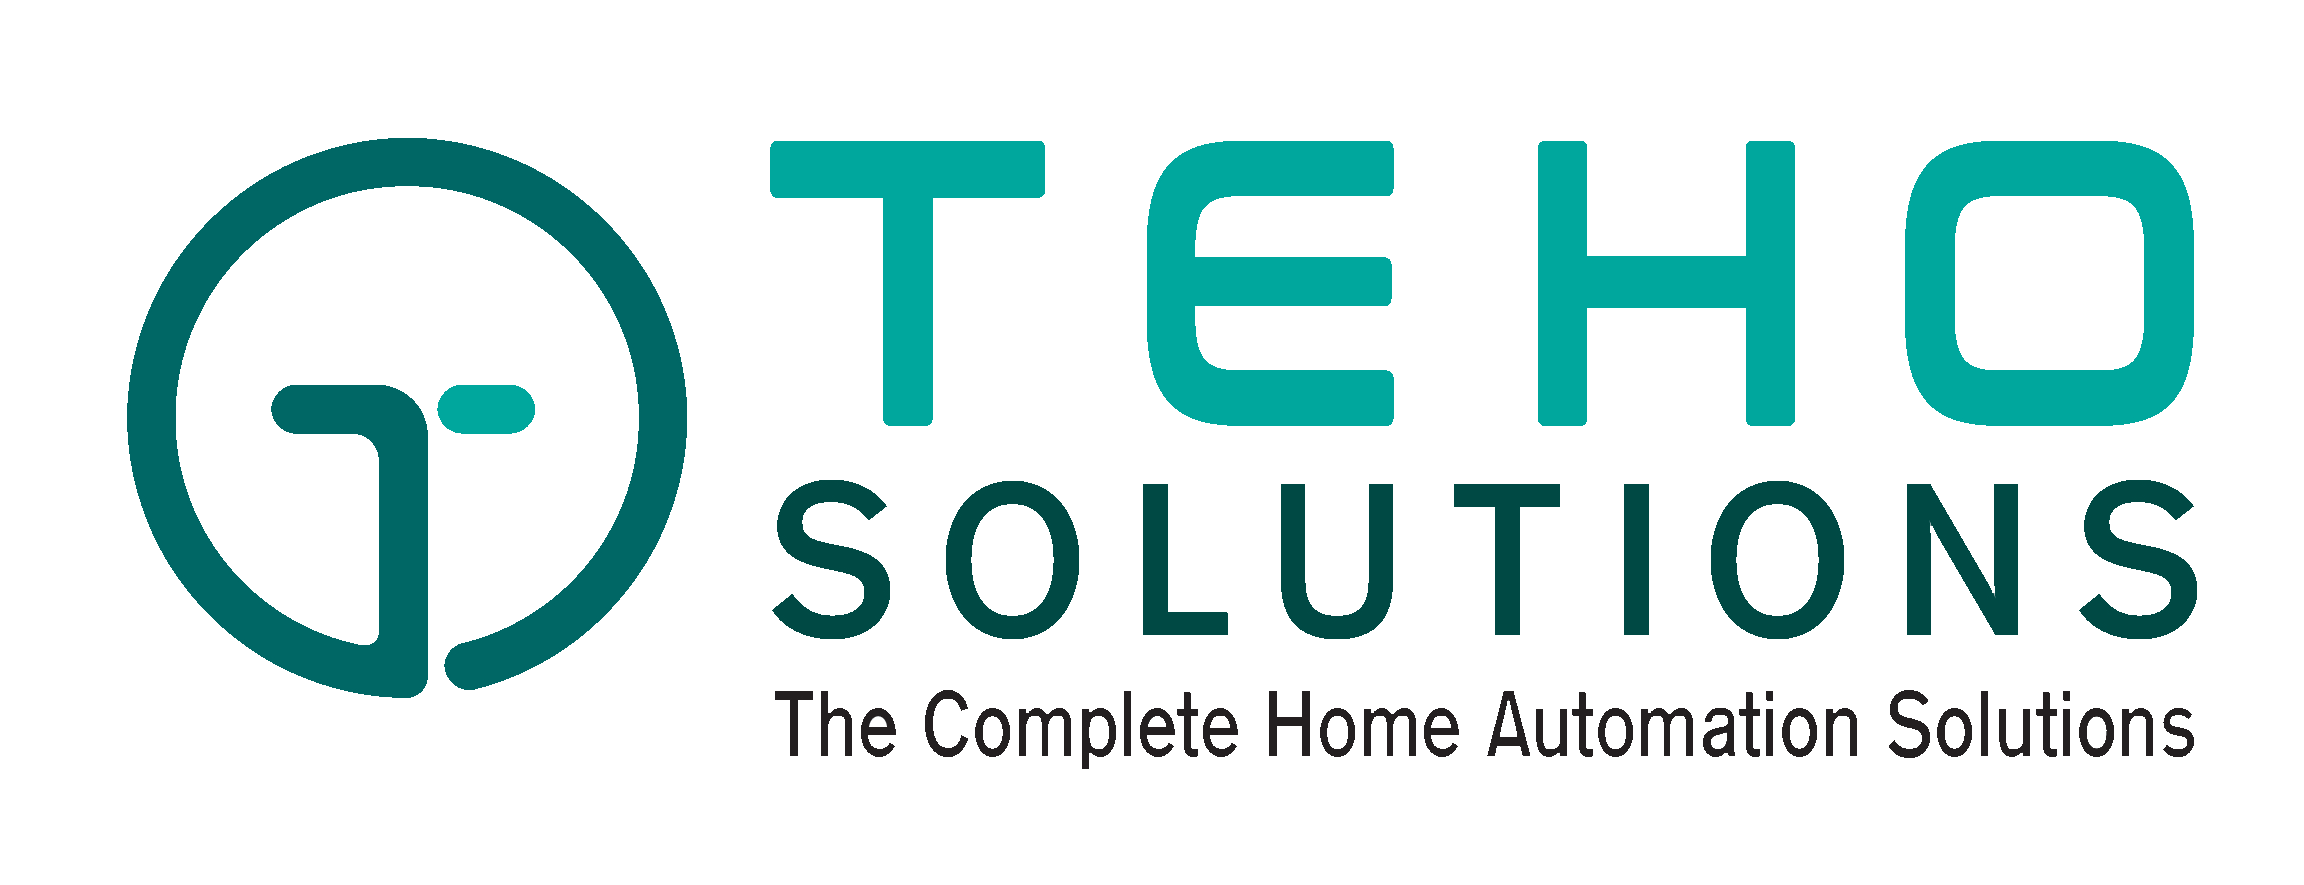 Home Automation Services in Kerala